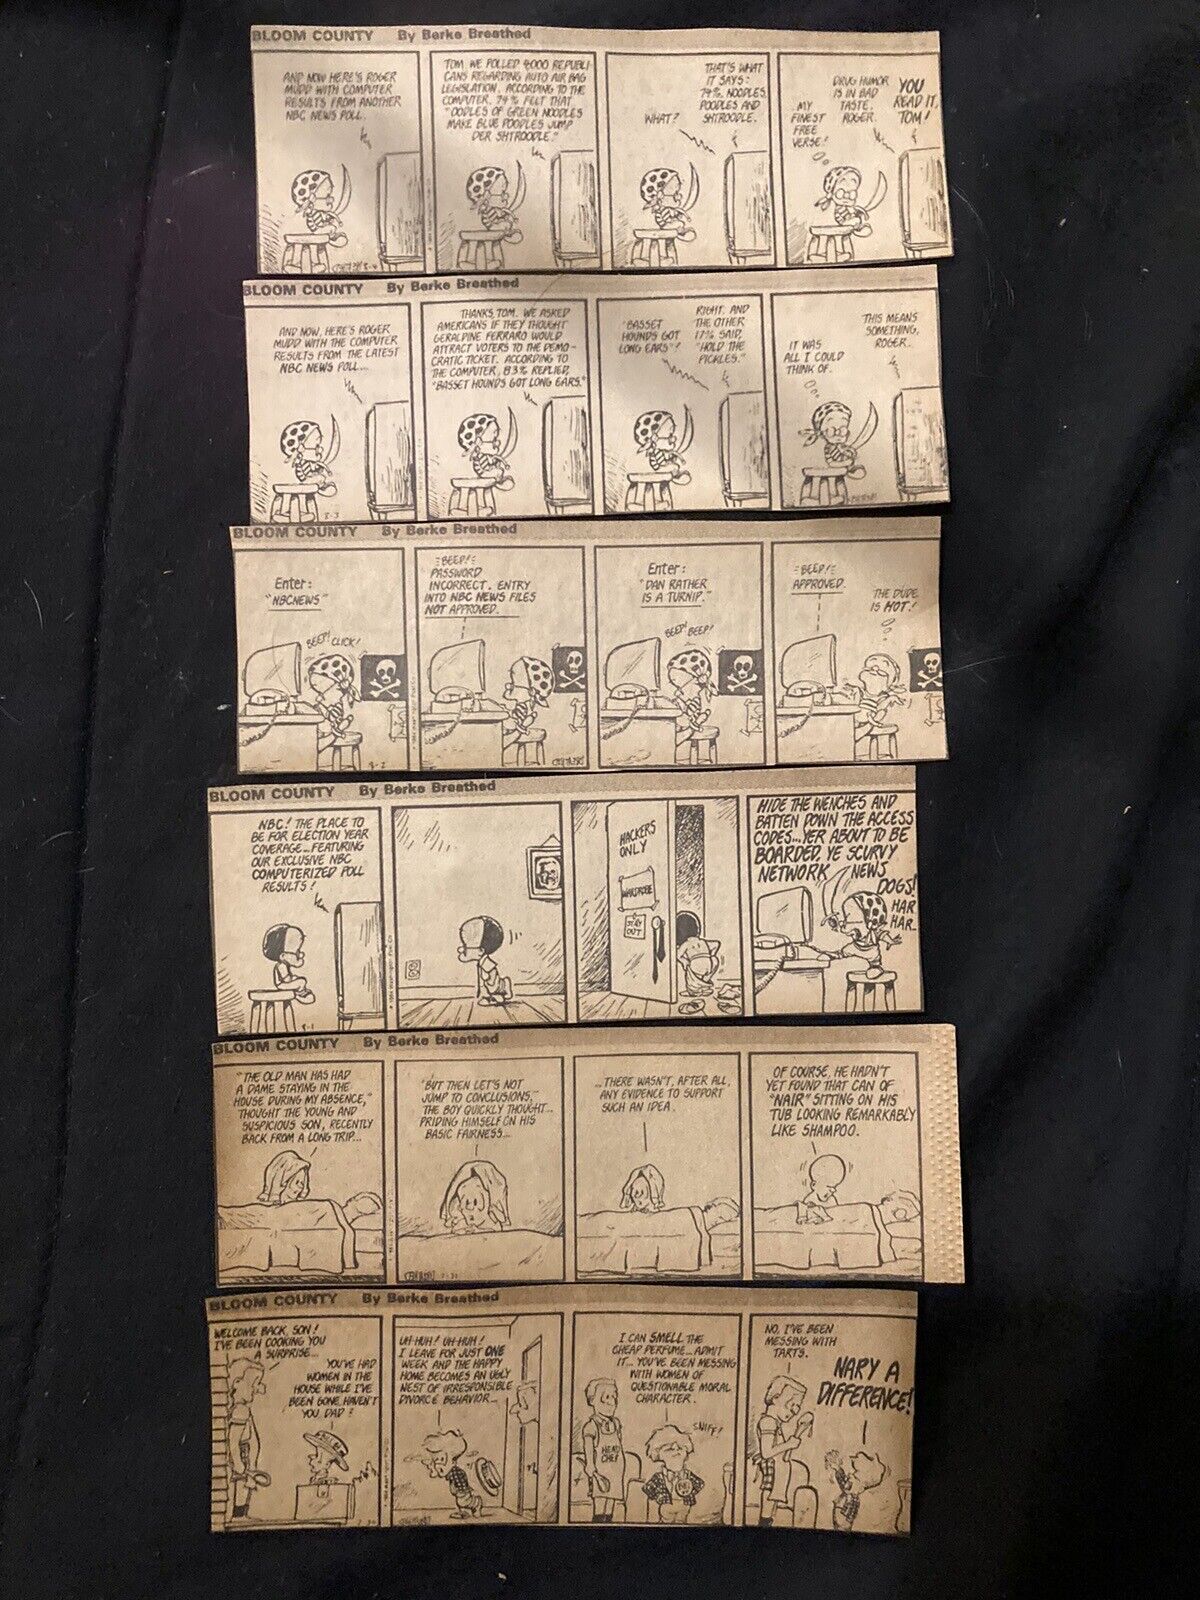 original Printed Newspaper Clippings Bloom County By Berke Breathed From 1980s